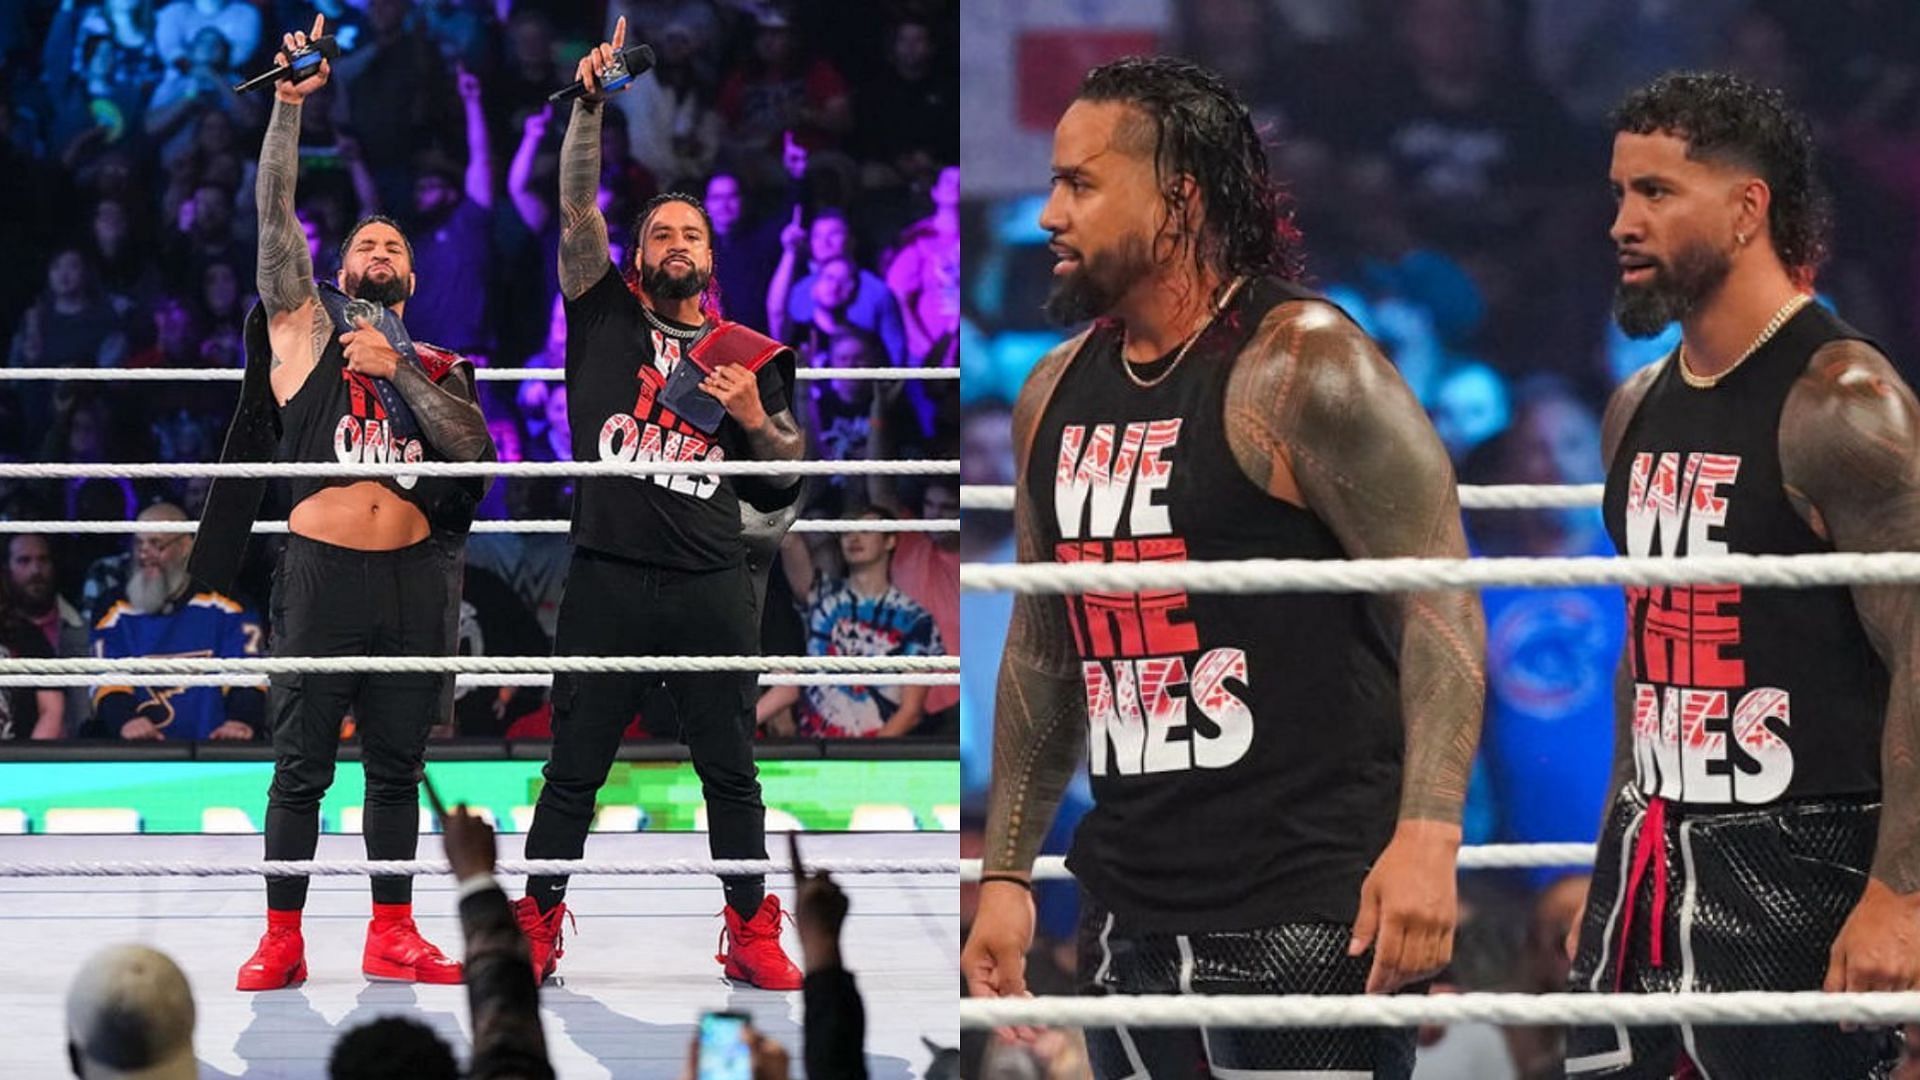 Will The Usos go against Roman Reigns